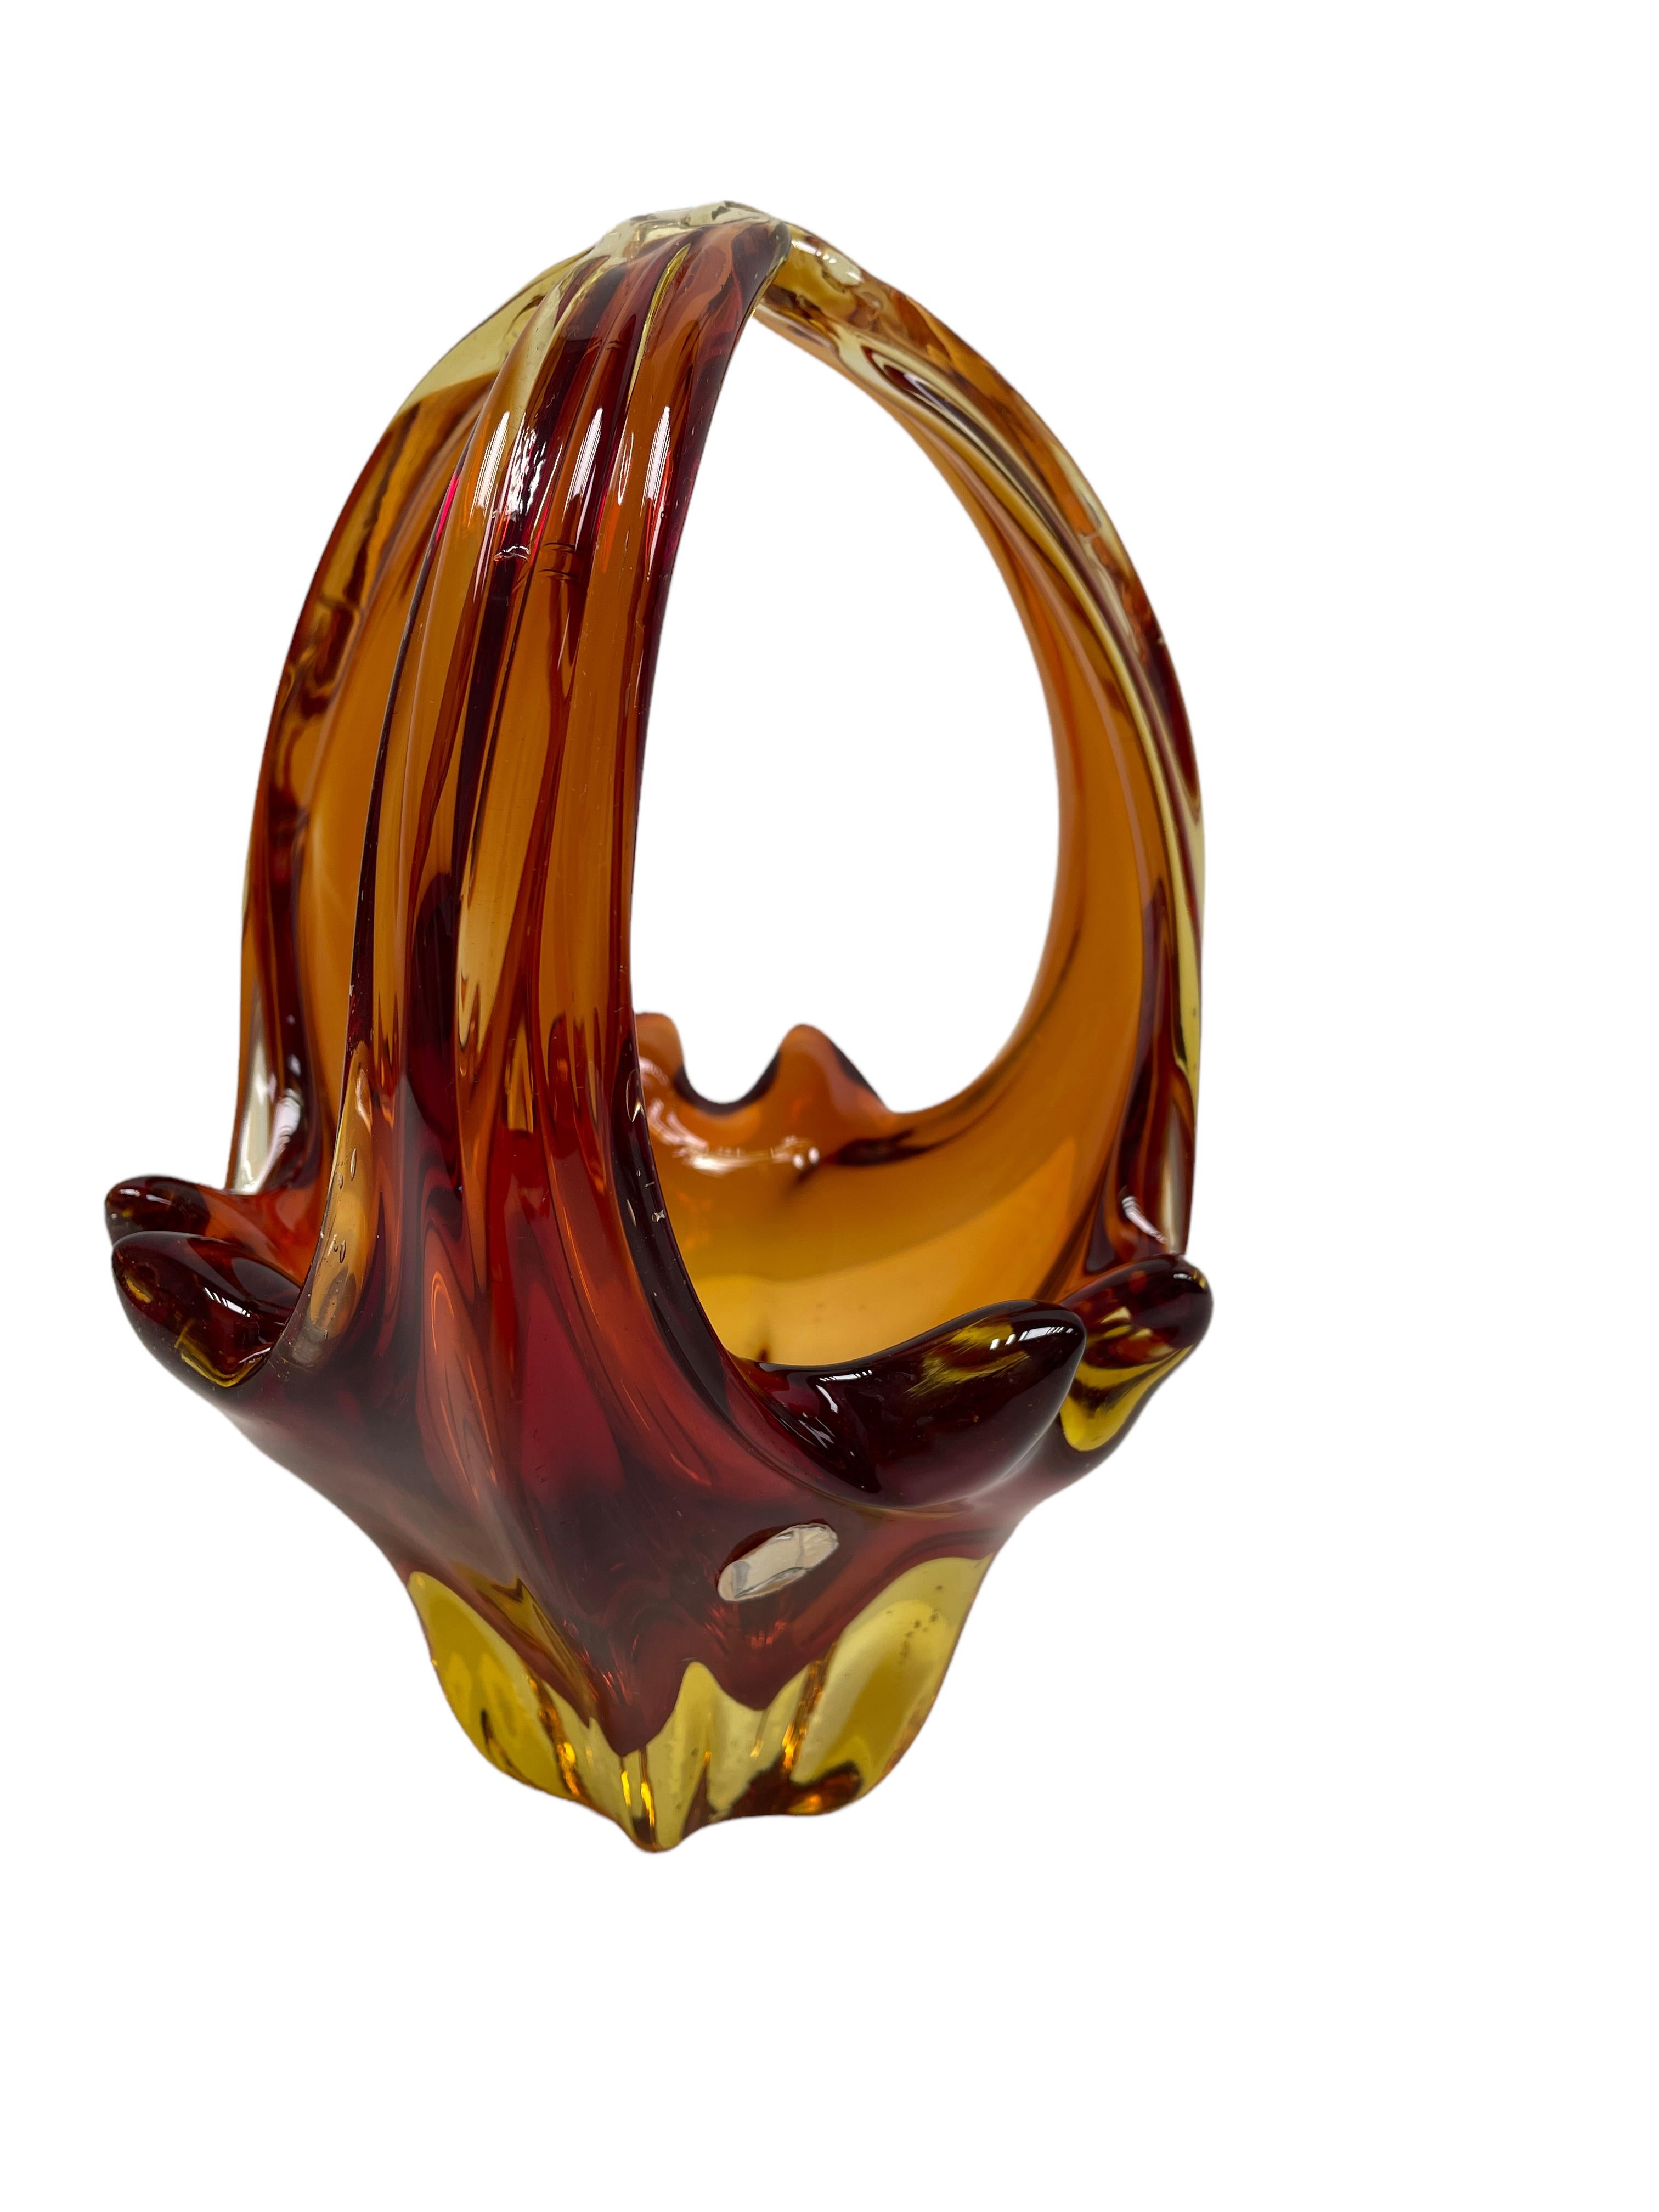 Italian Murano Art Glass Amber Brown Basket Fruit Bowl Catchall Italy, Sommerso, 1970s